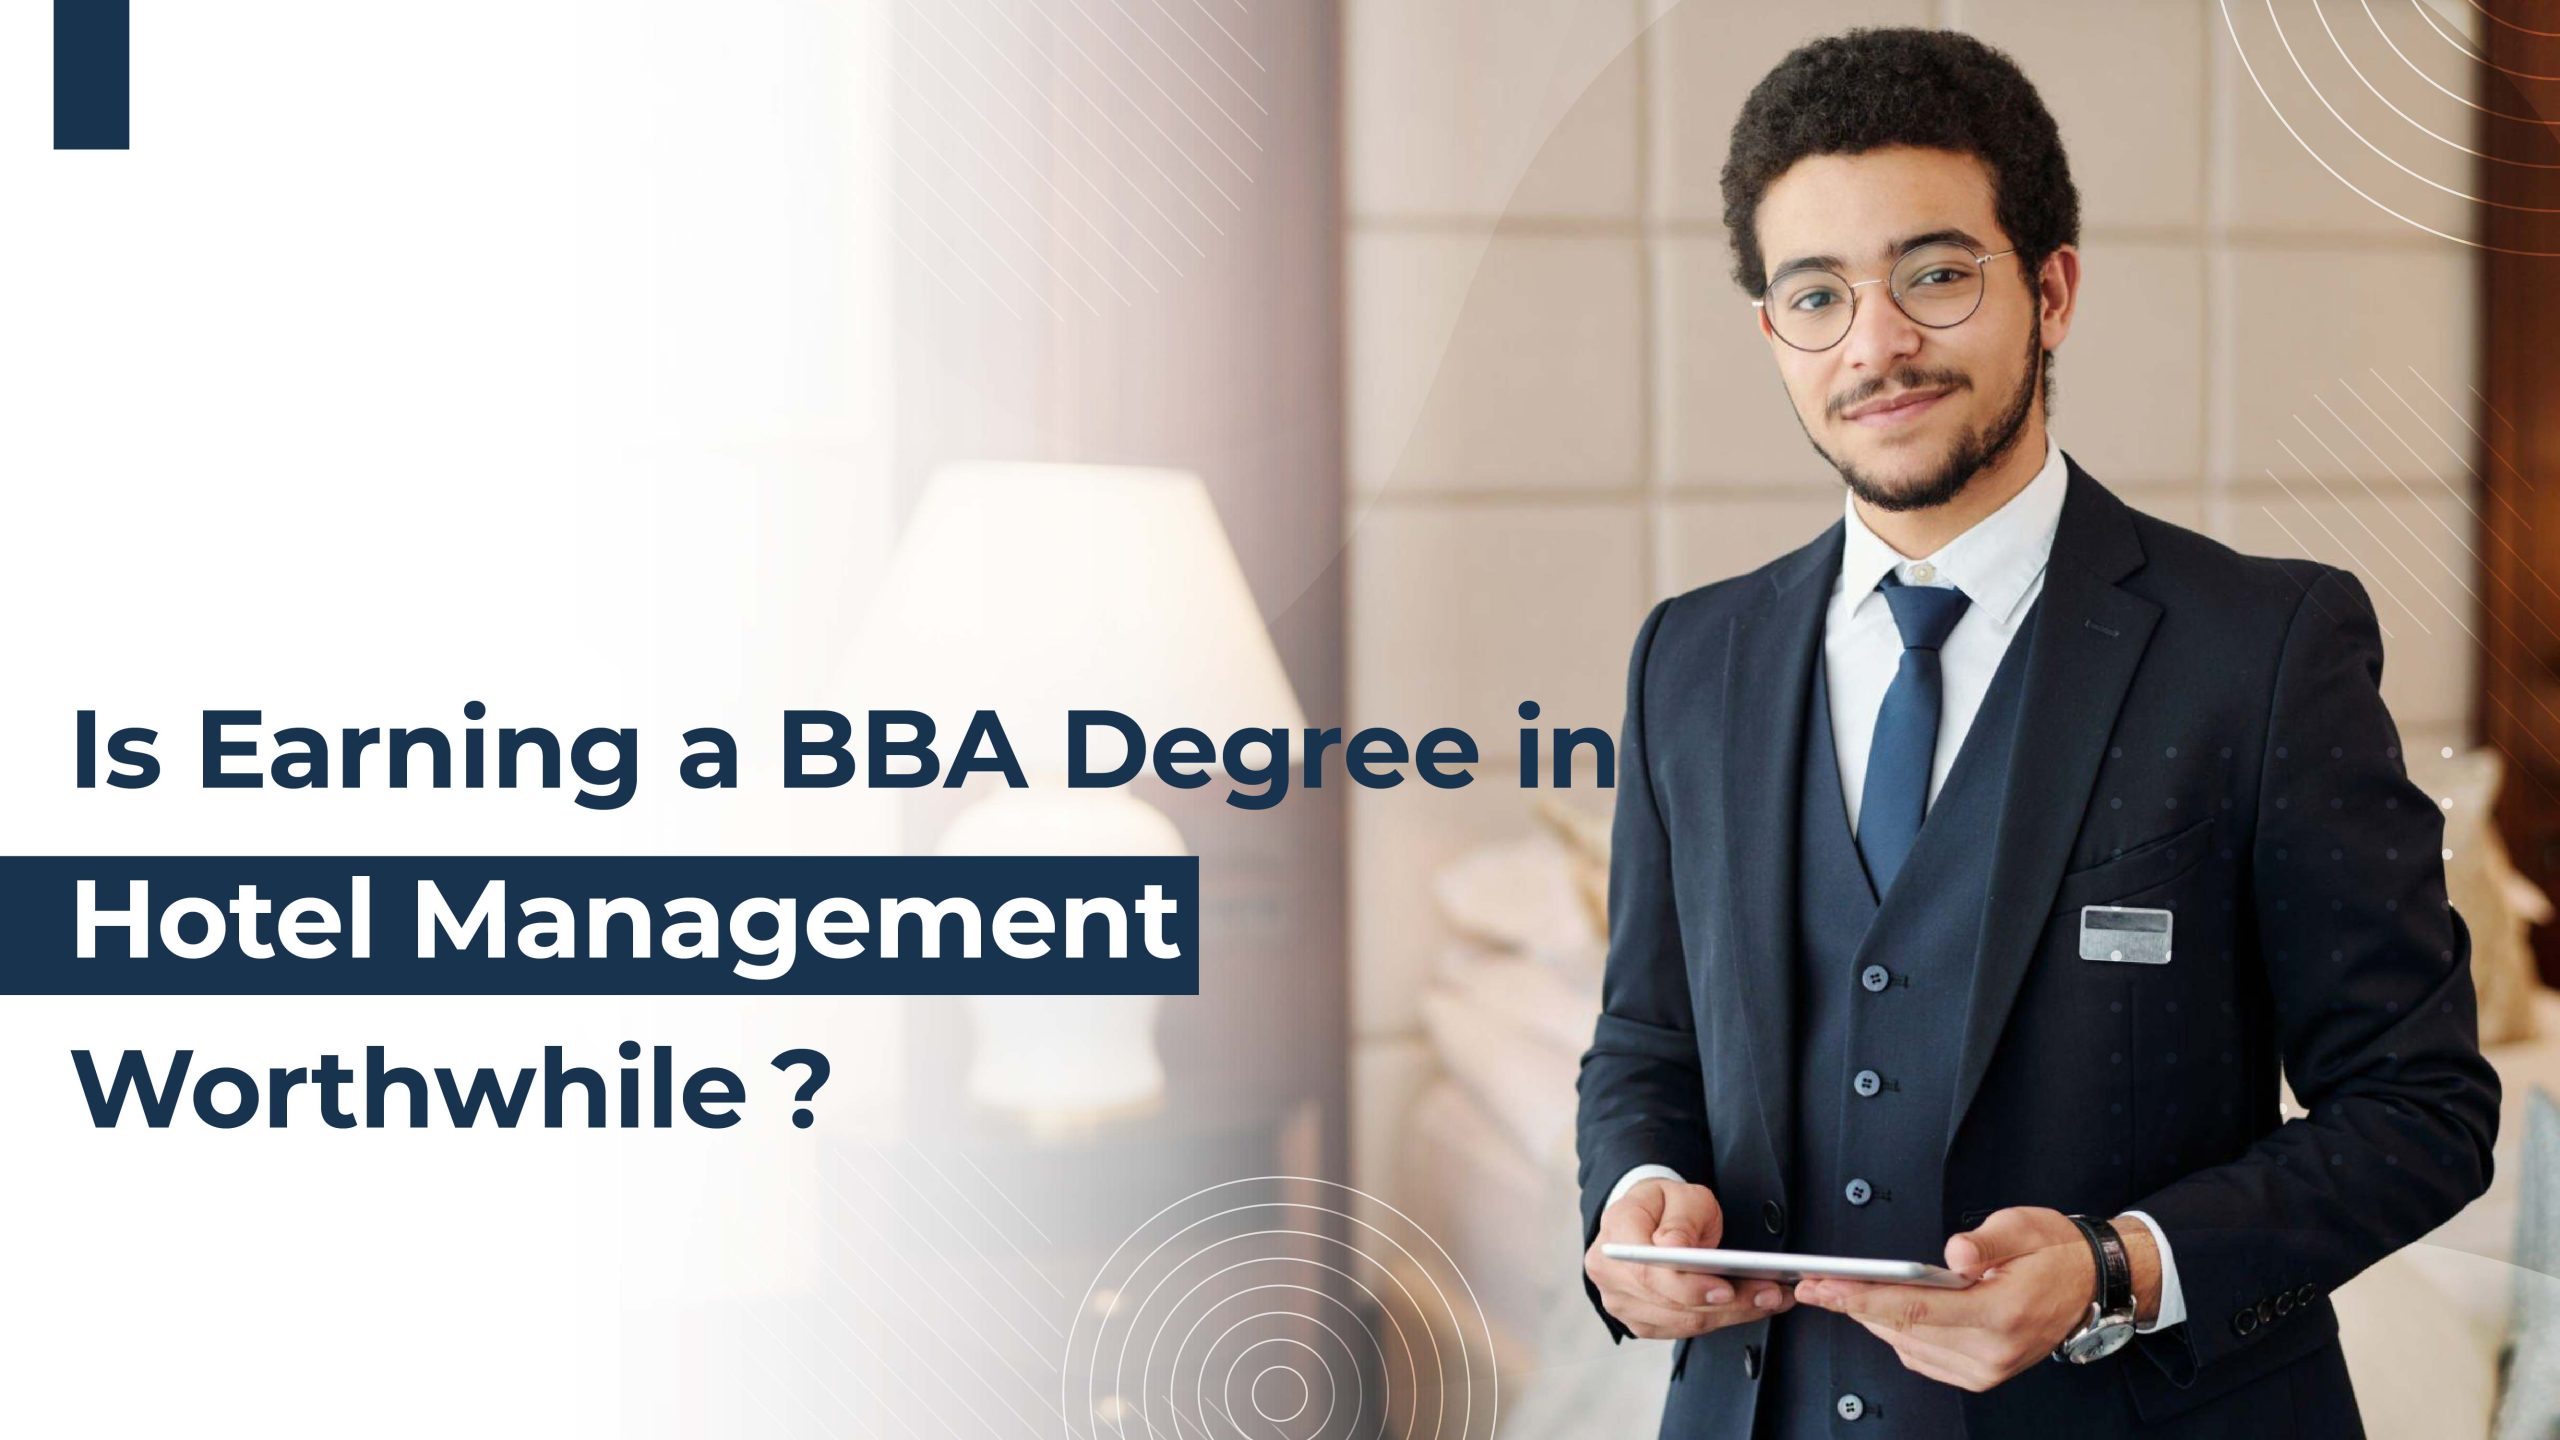 Is Earning a Bba Degree in Hotel Management Worthwhile?